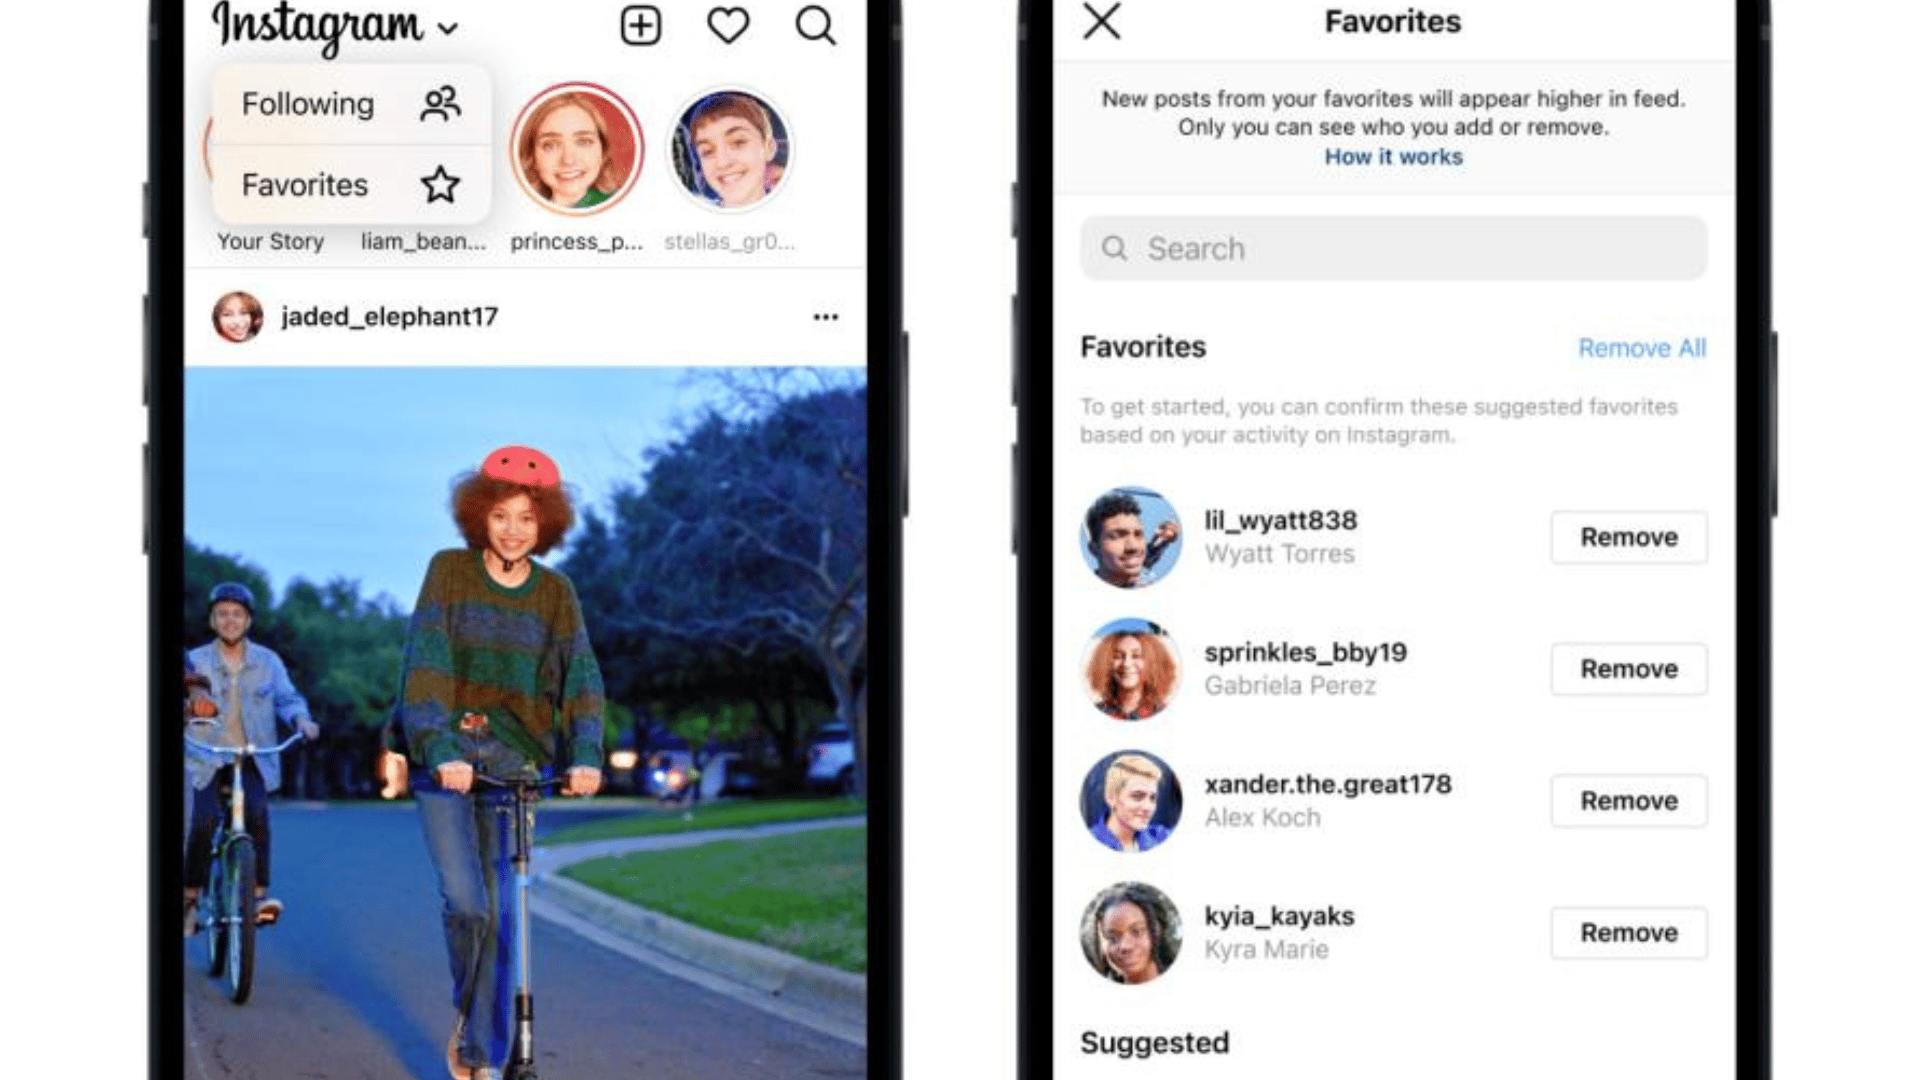 Instagram is testing 2 new ways to control your feed